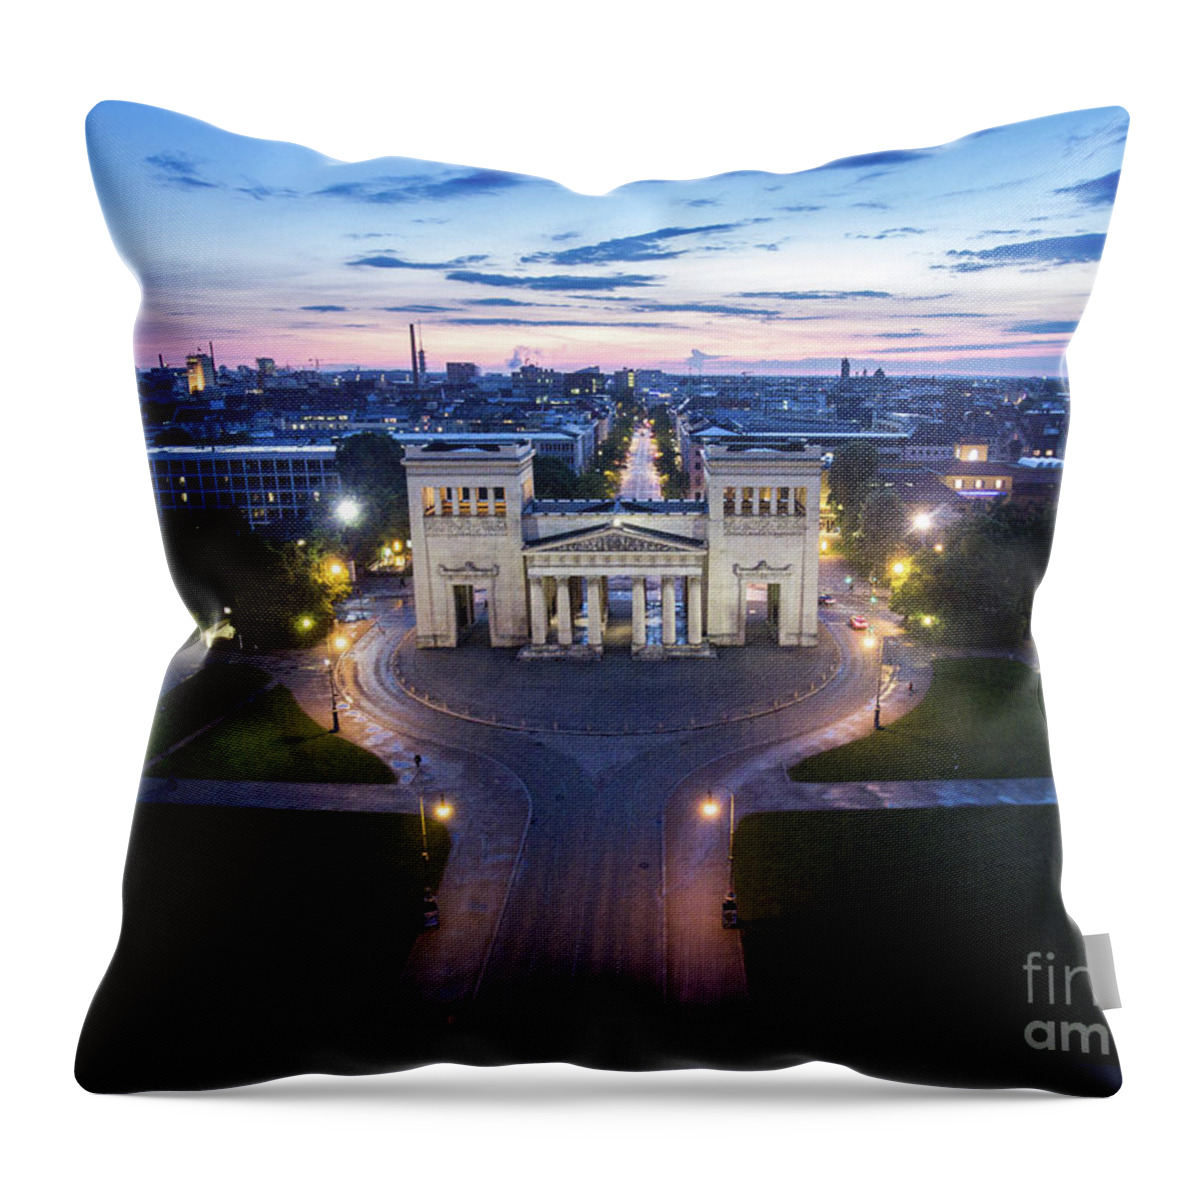 Dji Throw Pillow featuring the photograph The majestic Koenigplatz by Hannes Cmarits